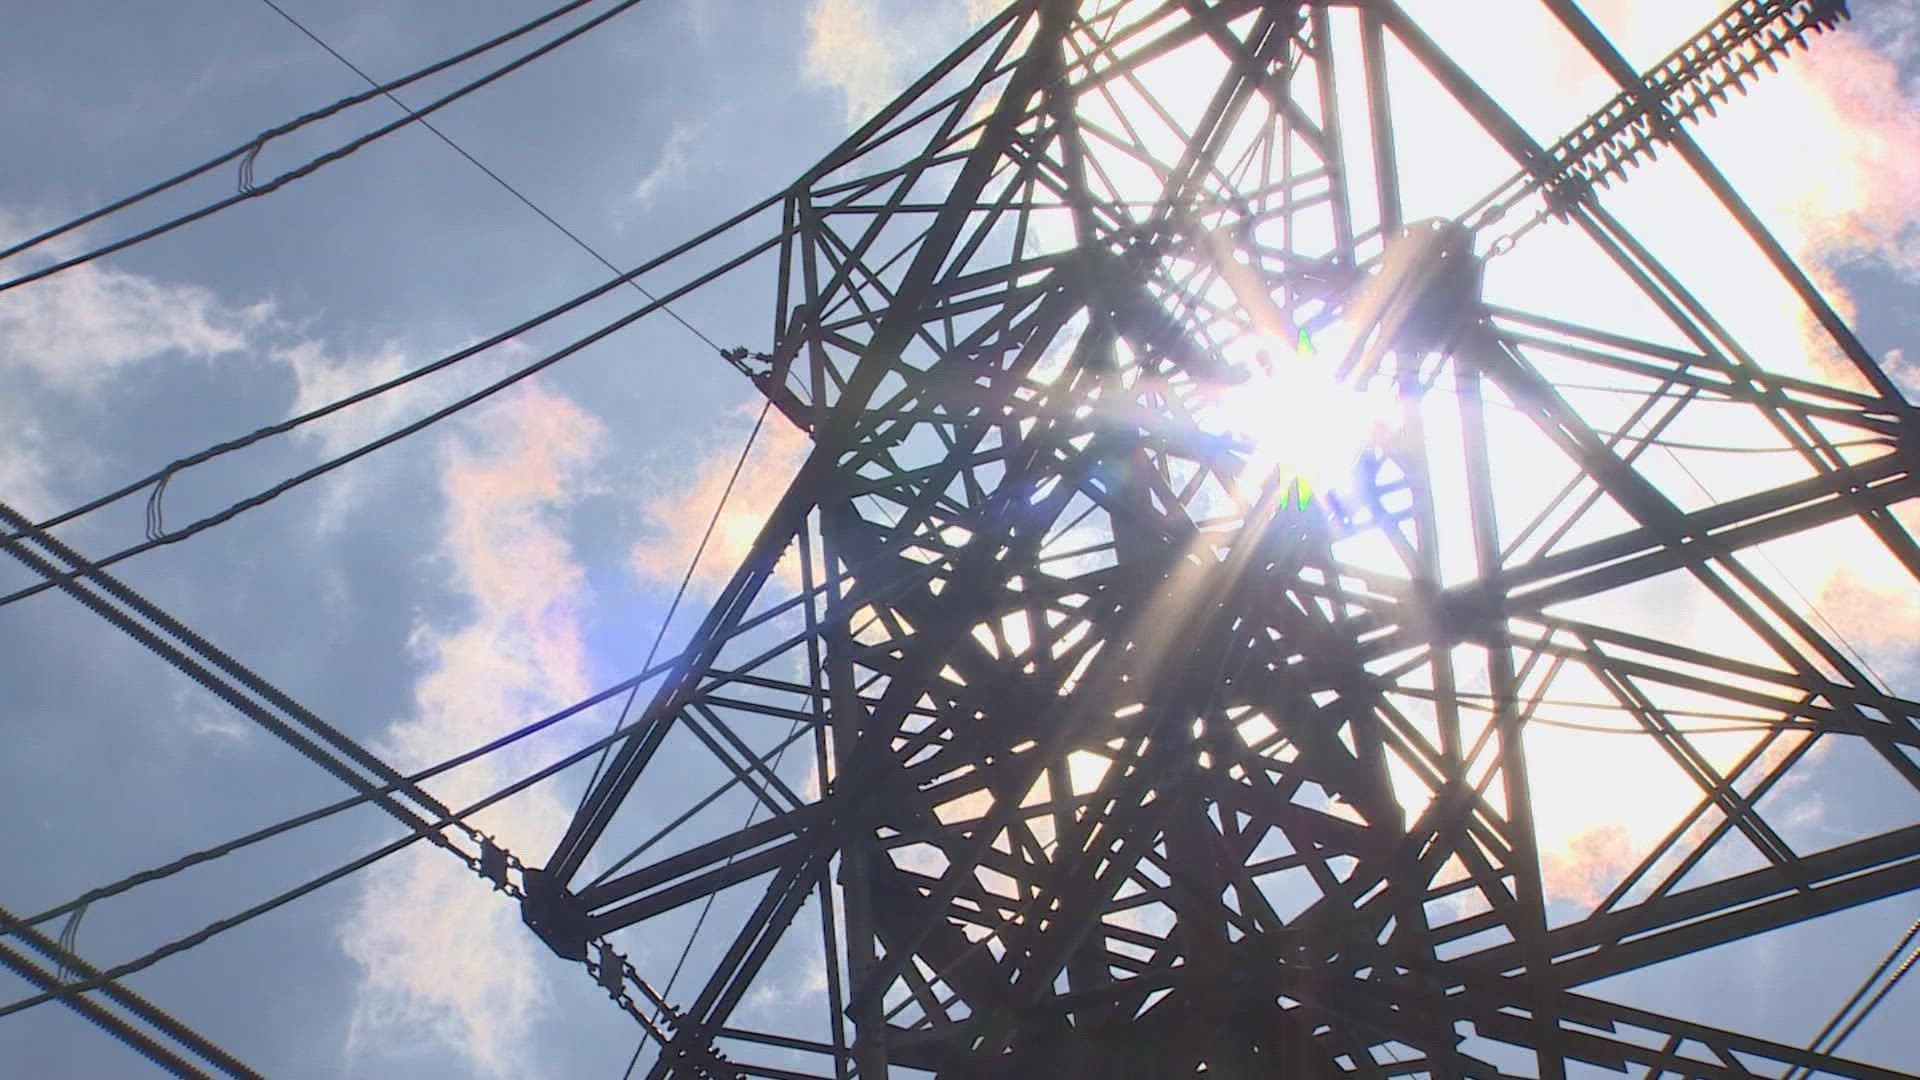 PUC to increase incentives for large consumers to register with ERCOT to decrease their electricity demand when there is a strain on the grid.